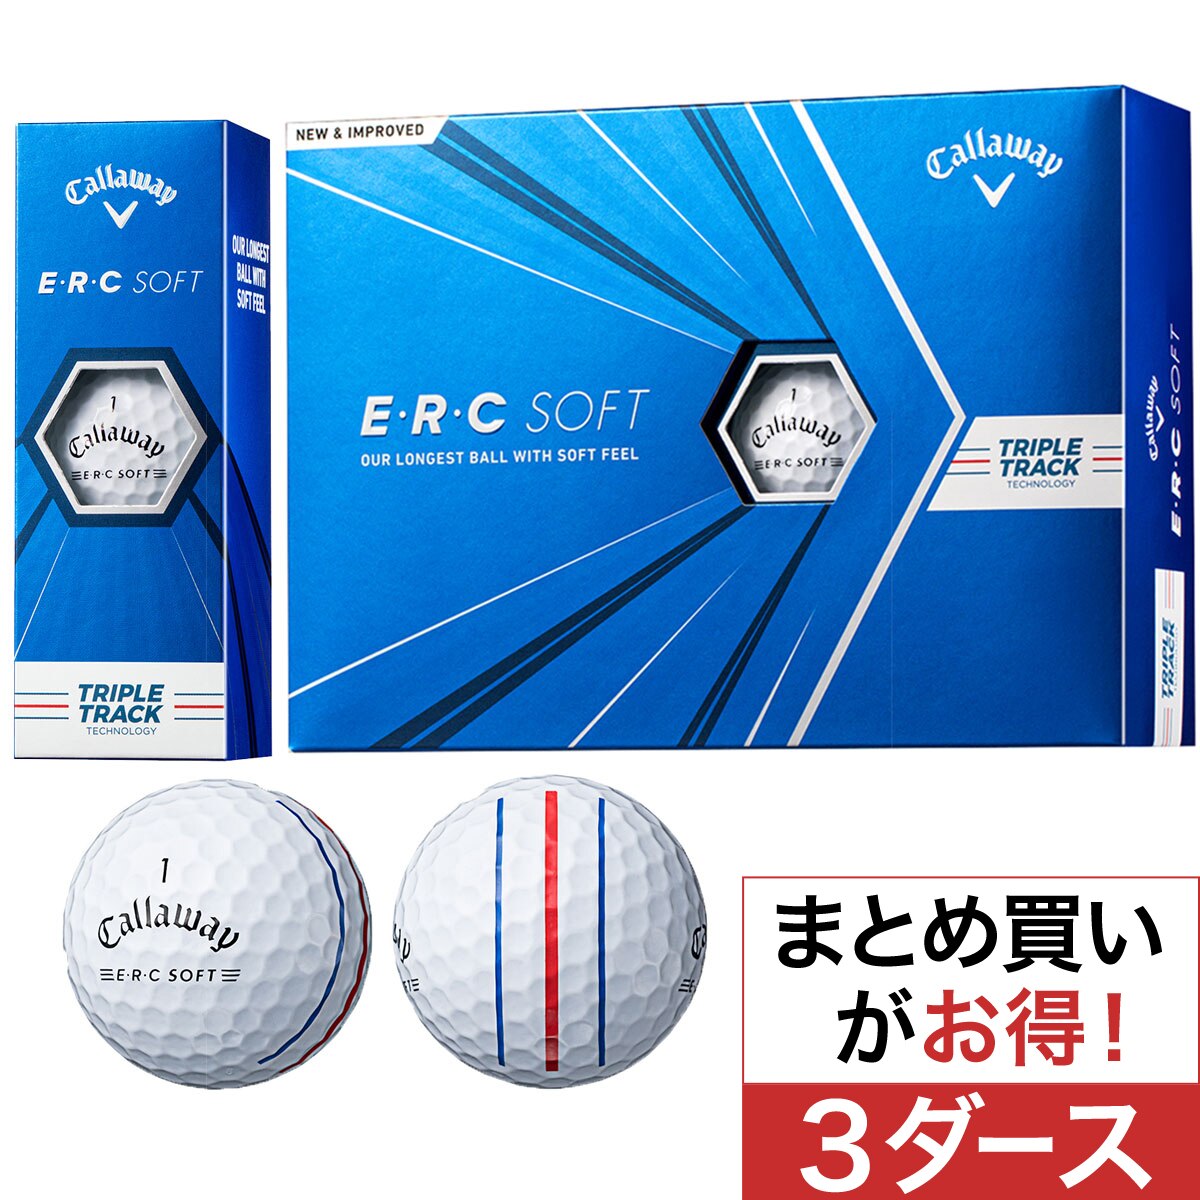 ERC SOFT 21 TRIPLE TRACK 2ダースセット24球　イエロー